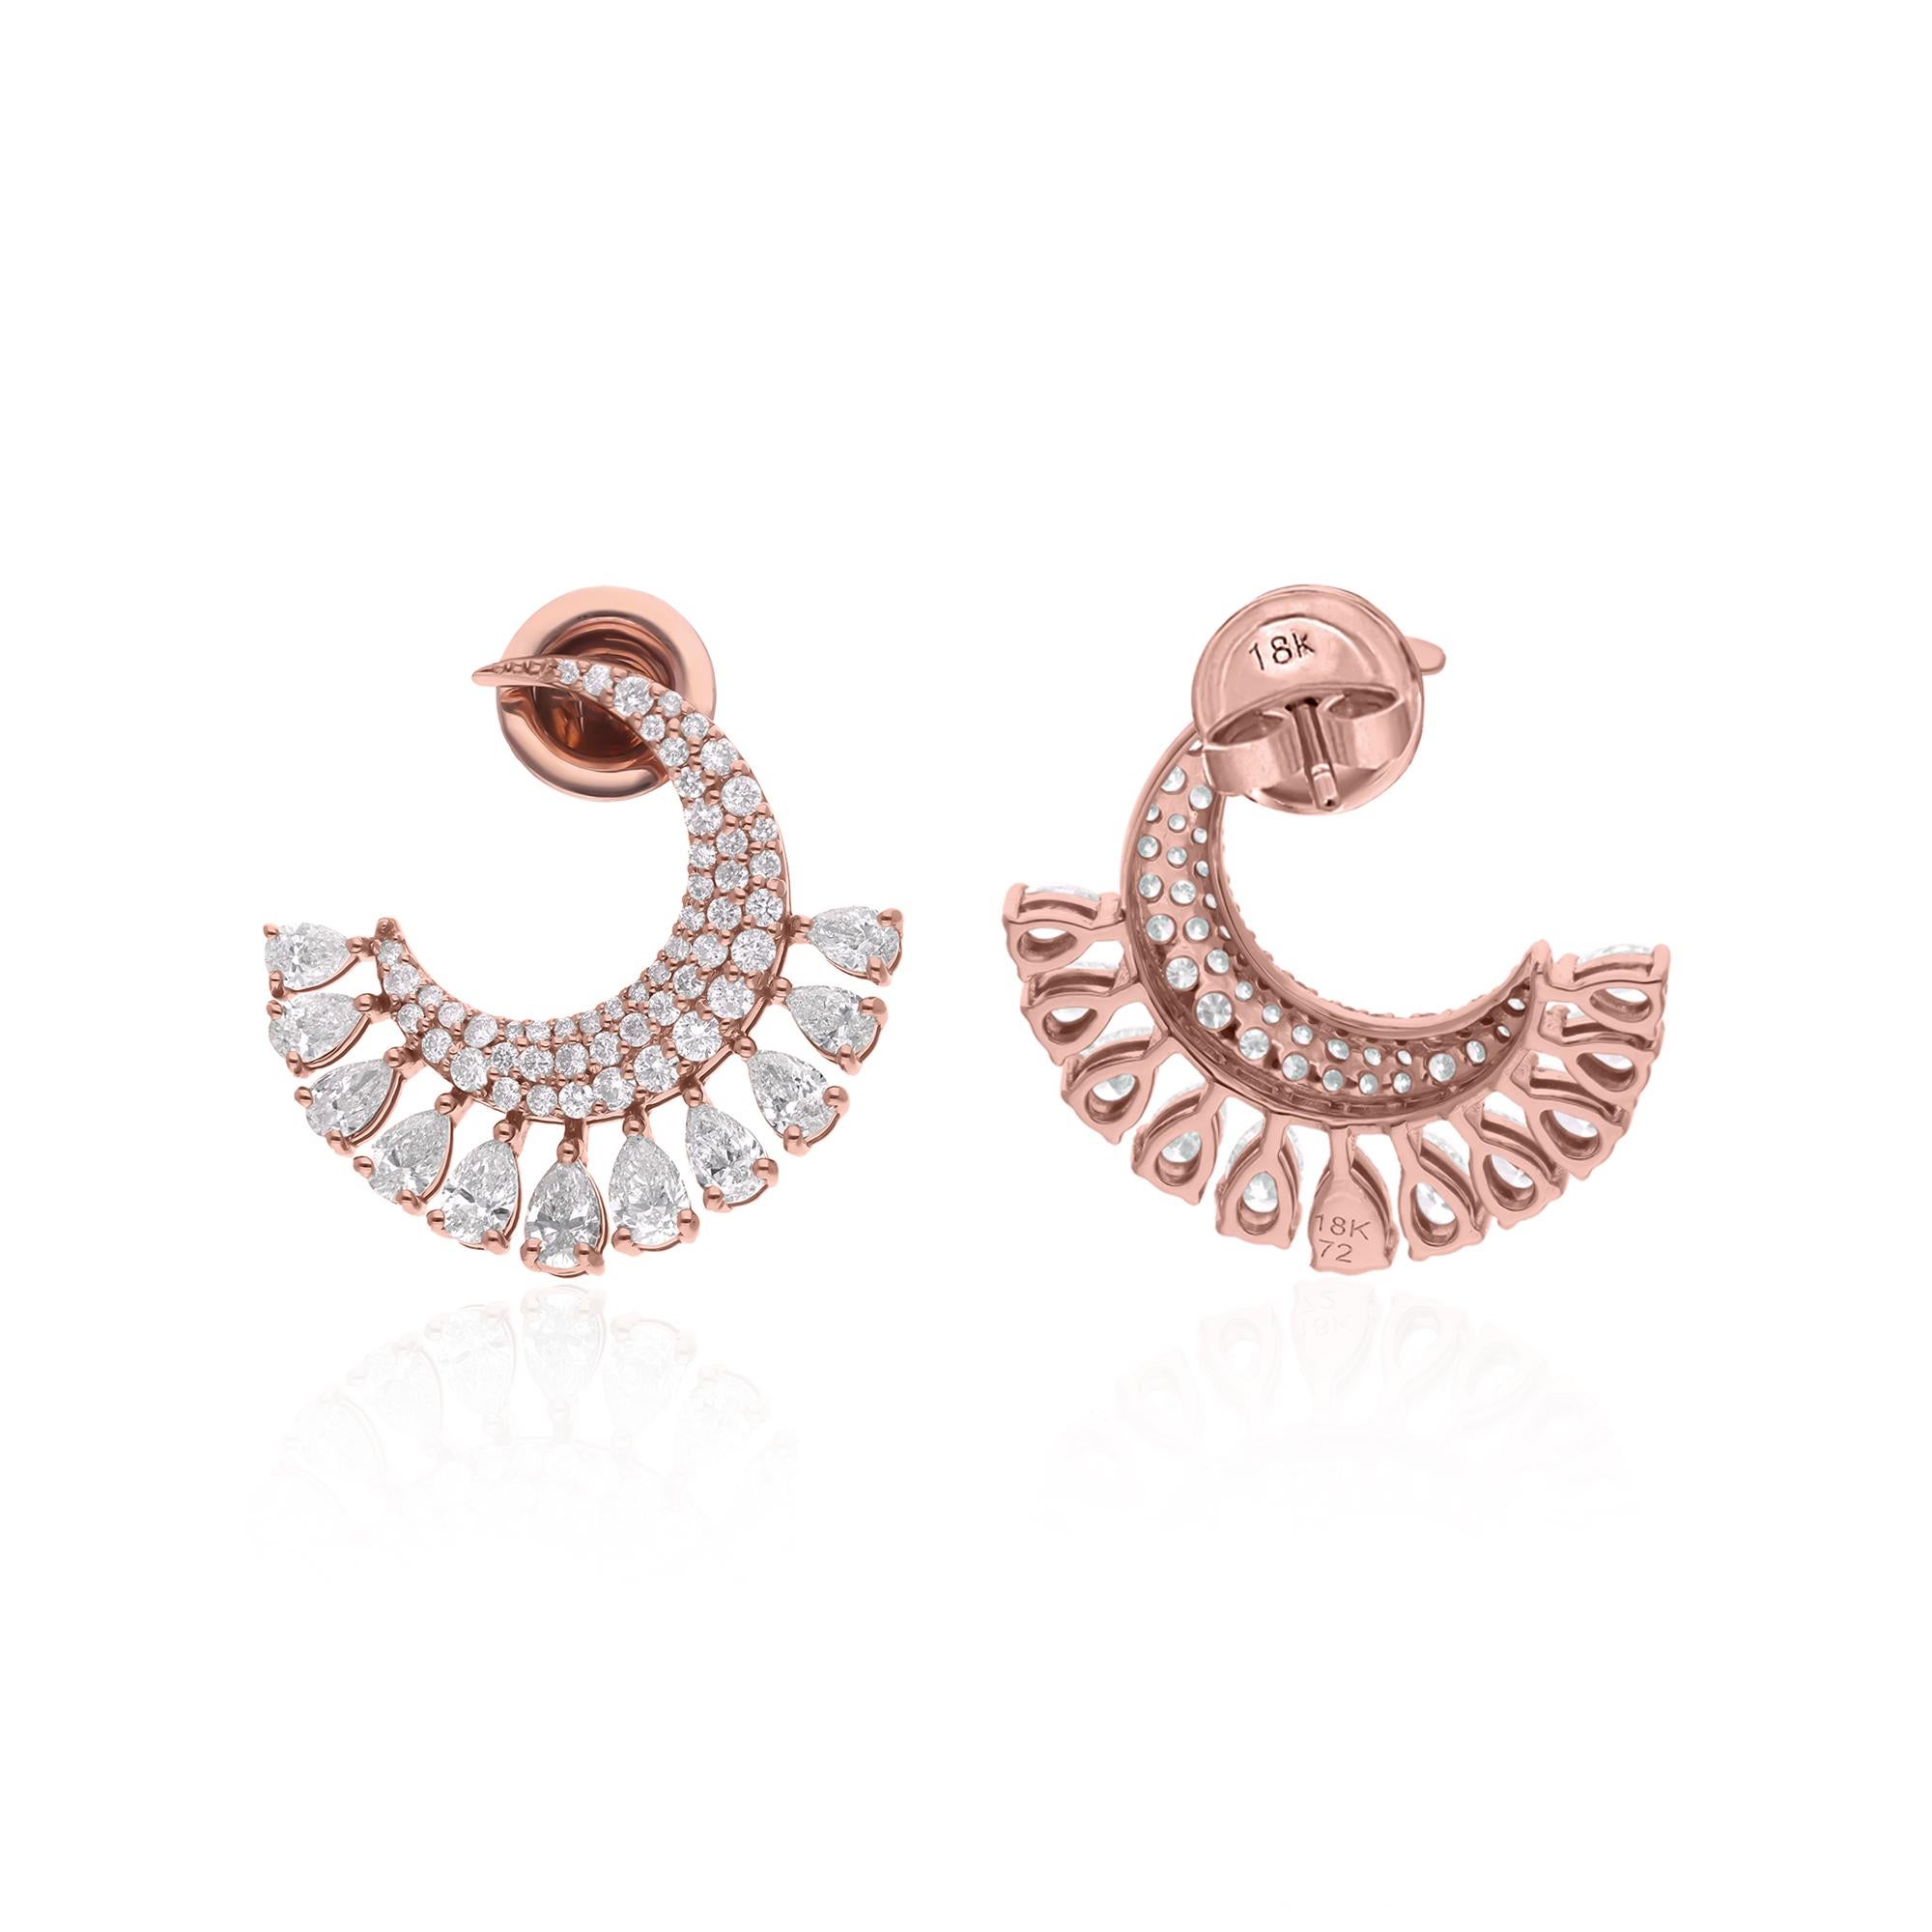 Crafted with precision and care, these earrings are a testament to the artisan's dedication to quality and craftsmanship. Each diamond is carefully selected for its brilliance and clarity, ensuring that every pair of earrings sparkles with